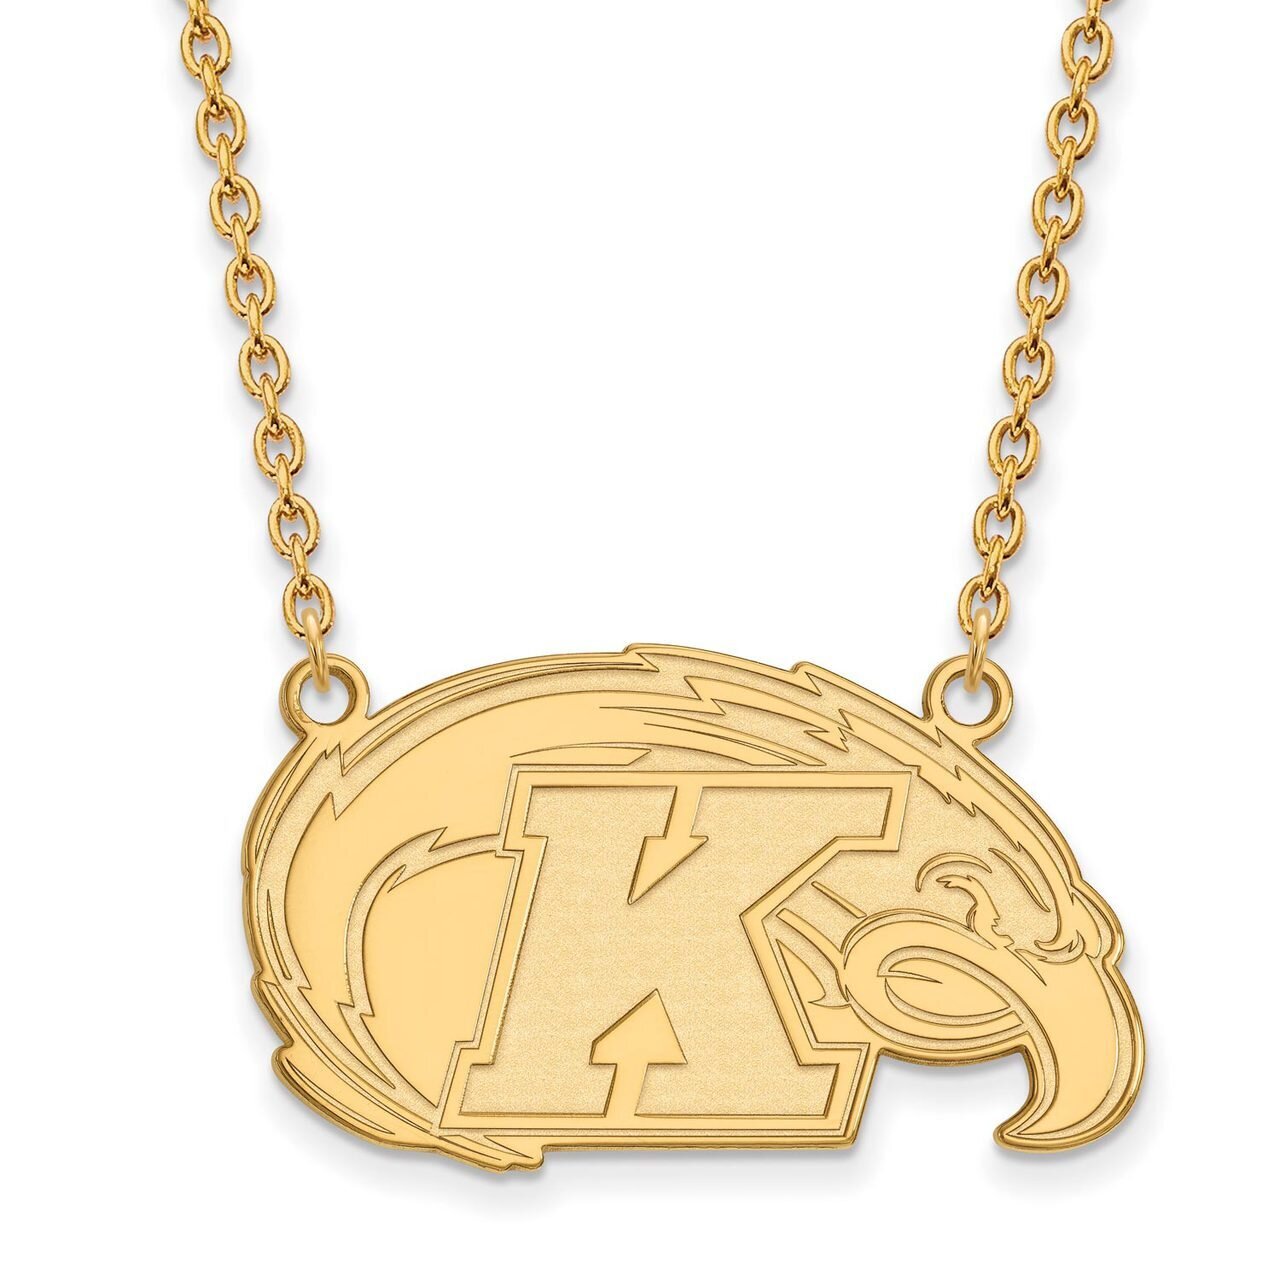 Kent State University Large Pendant with Chain Necklace 14k Yellow Gold 4Y009KEN-18